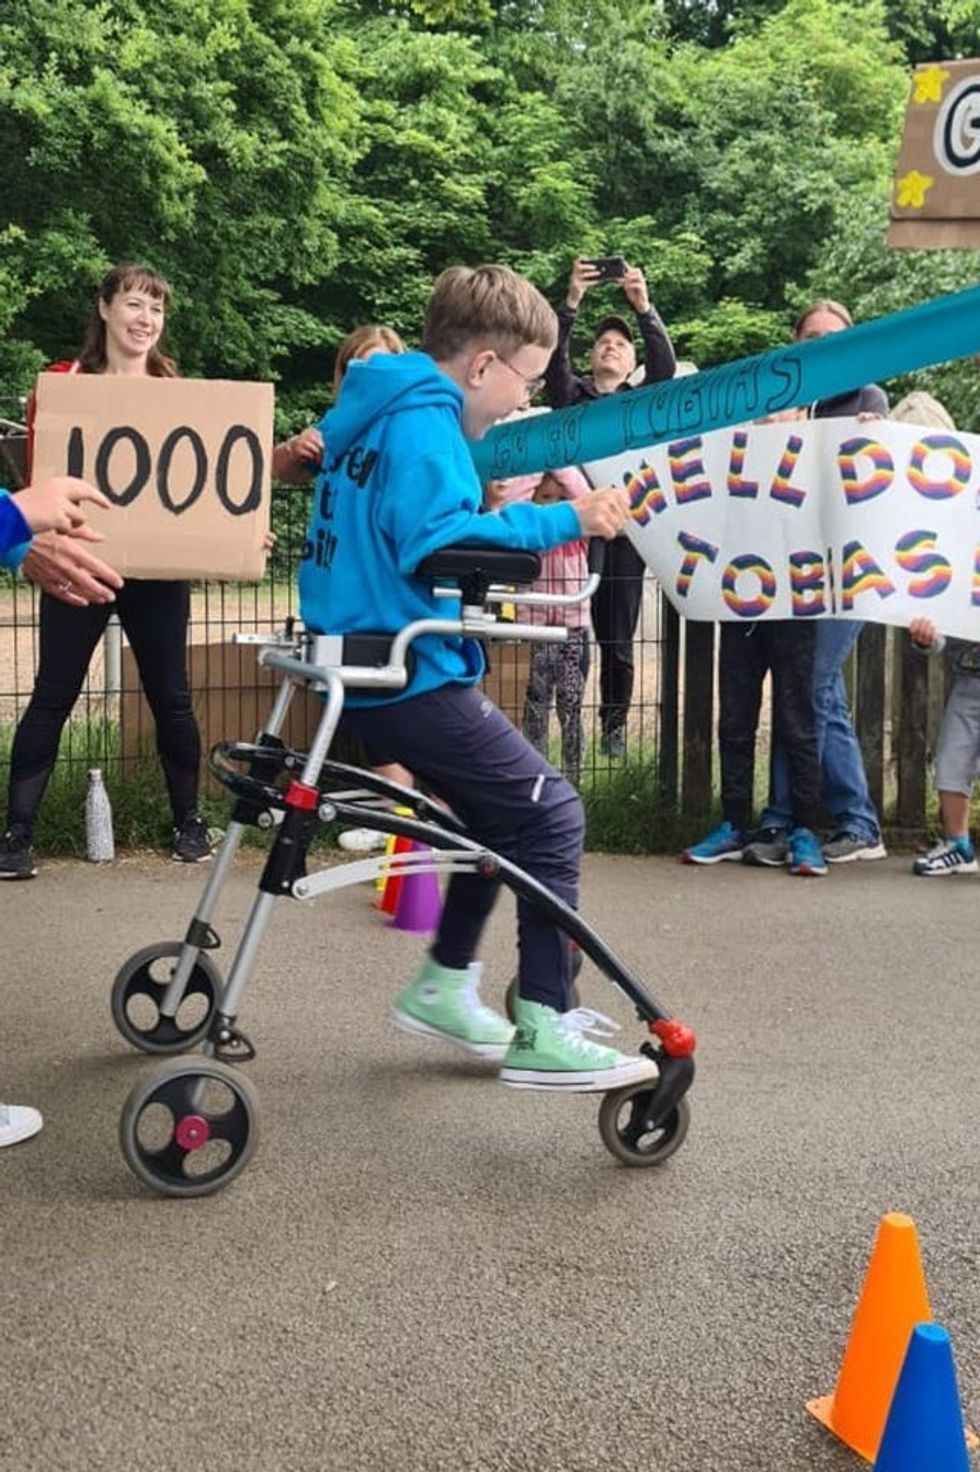 Tobias Weller accessible playgrounds campaign